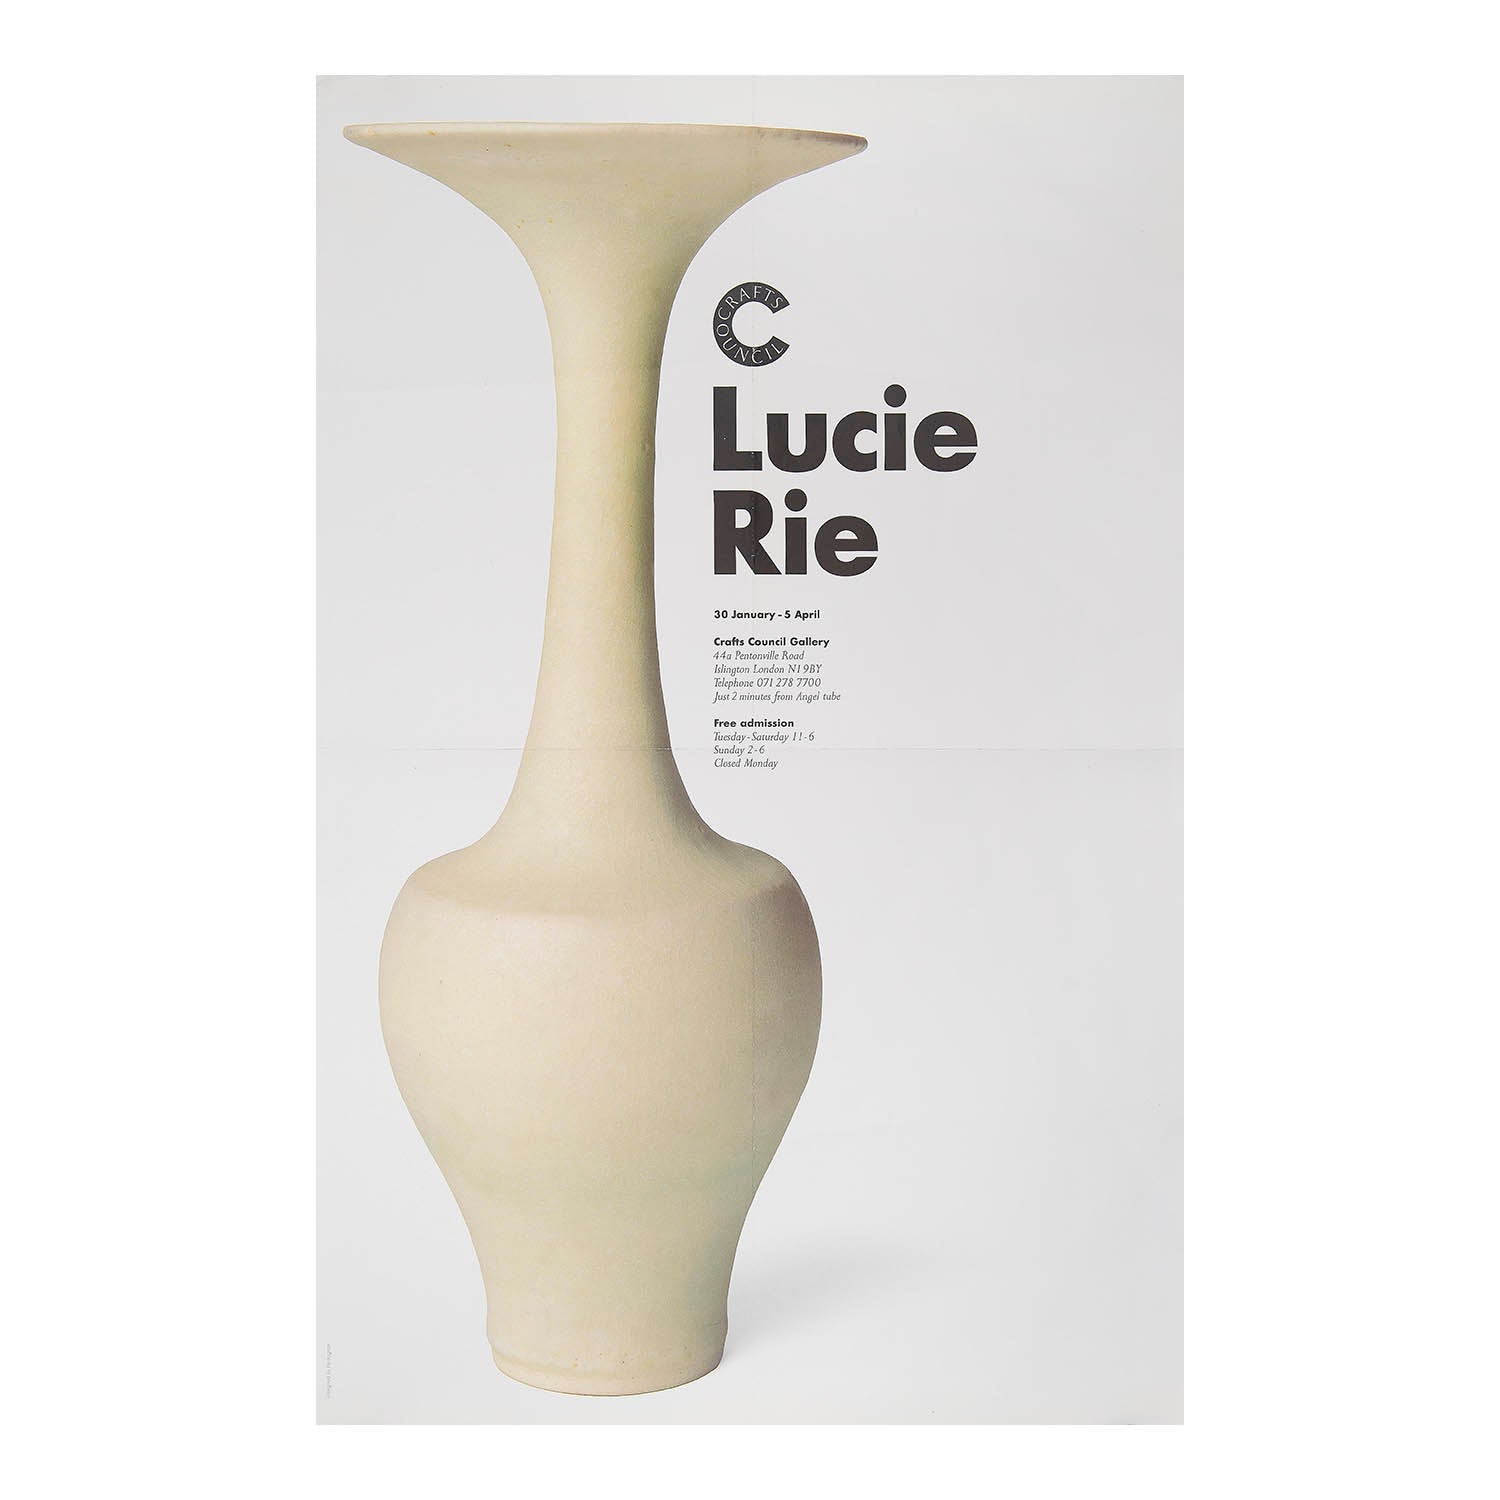 exhibition poster, Lucie Rie, held at the Crafts Council Gallery, c.1991. Designed by Pentagram.